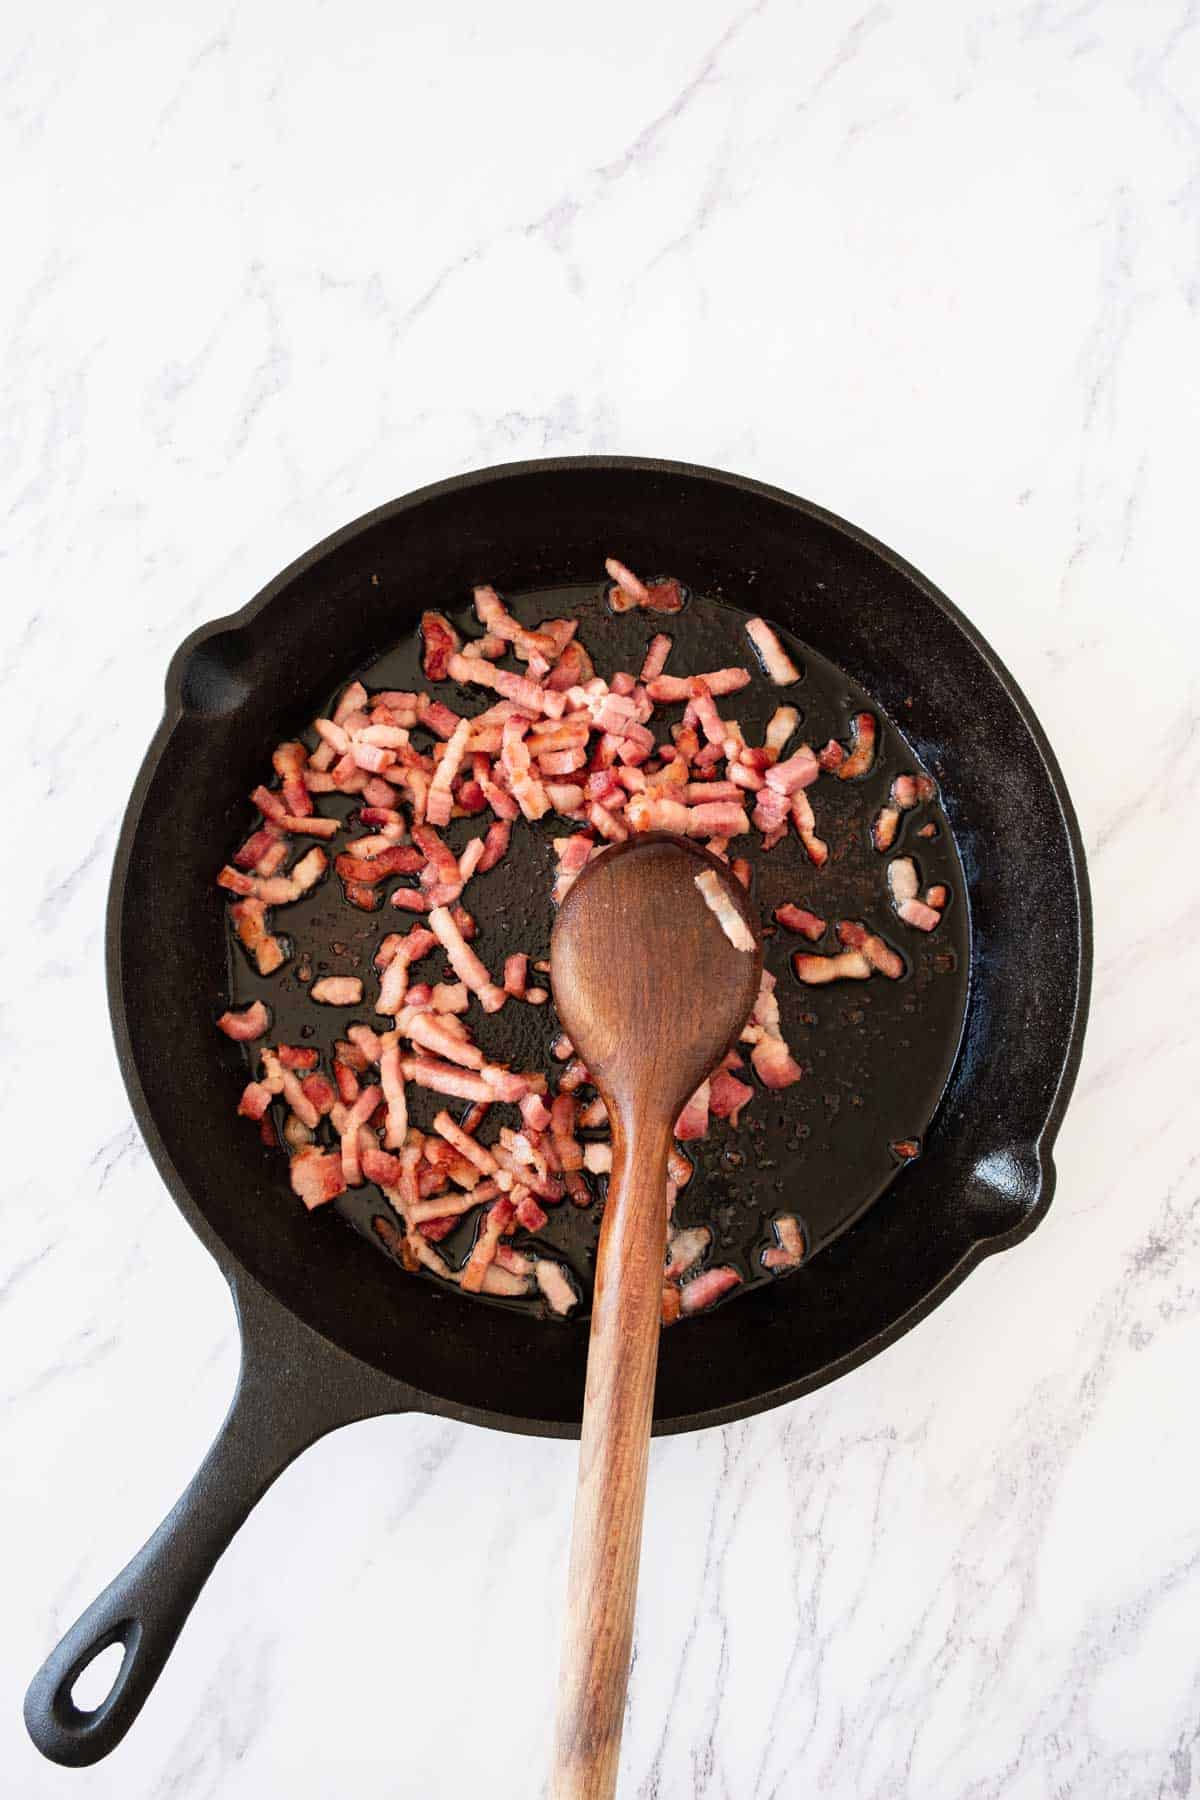 Stirring bacon bits in a cast iron pan with a wooden spoon.